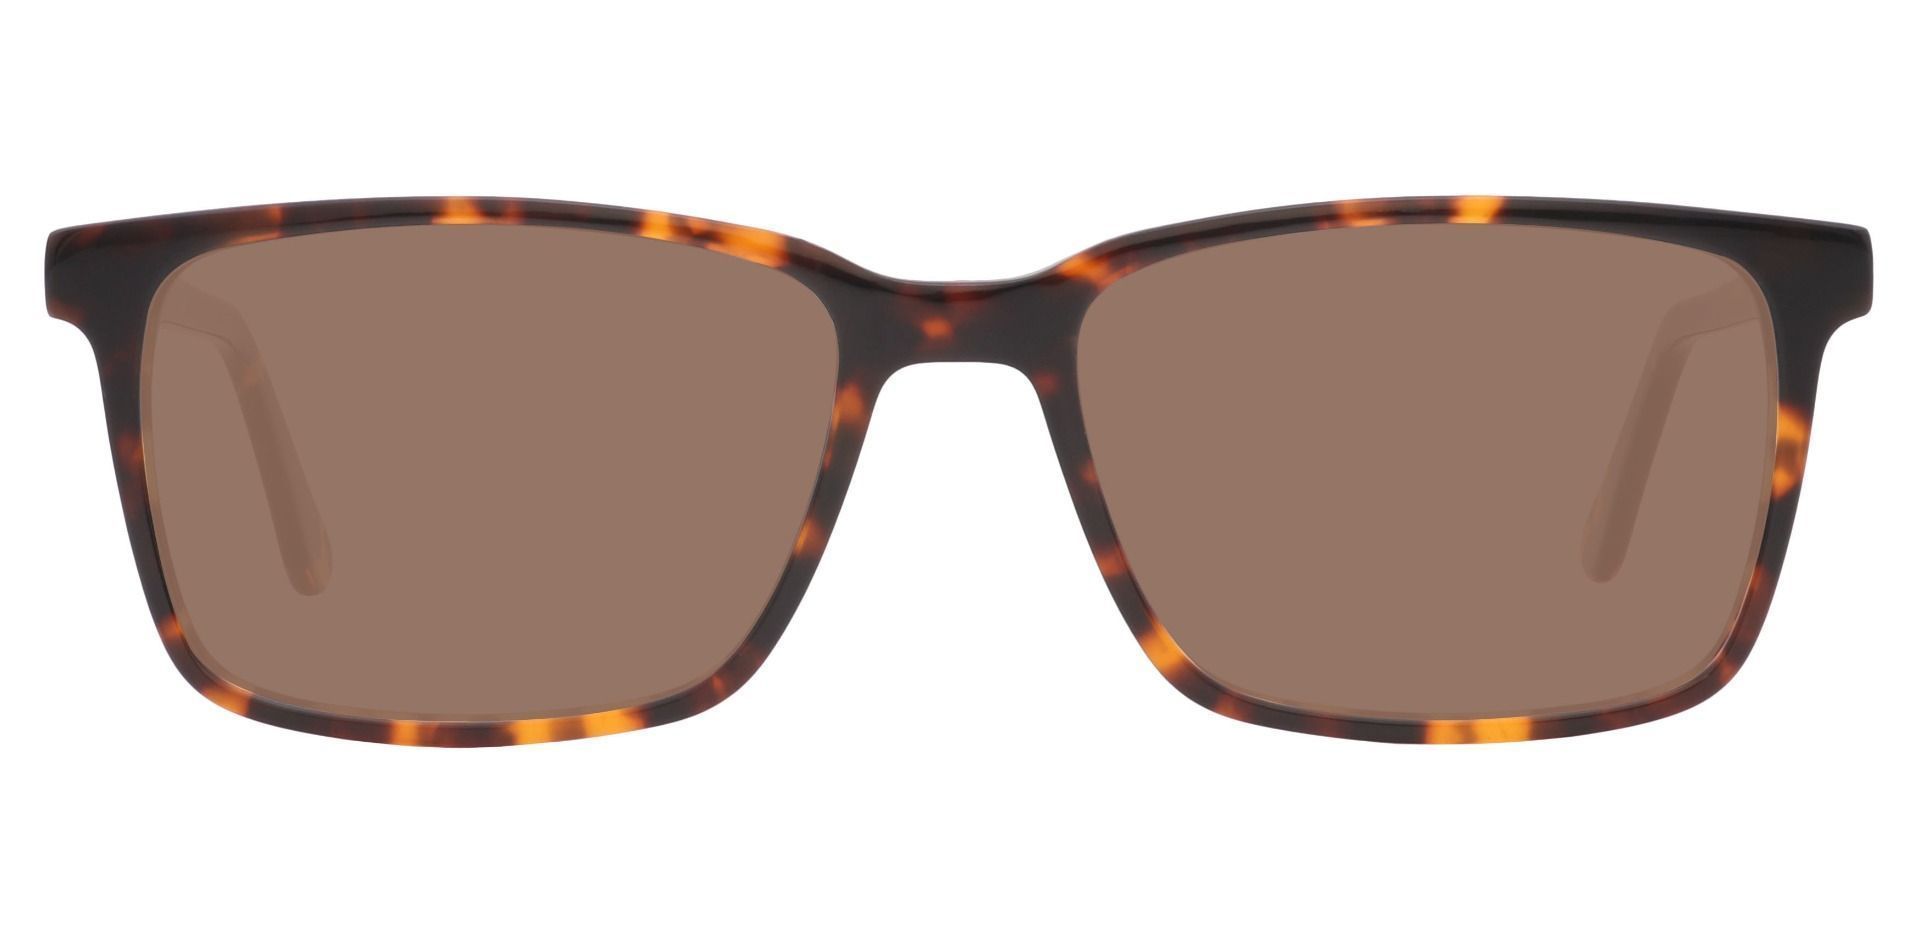 Venice Rectangle Lined Bifocal Sunglasses - Tortoise Frame With Brown Lenses